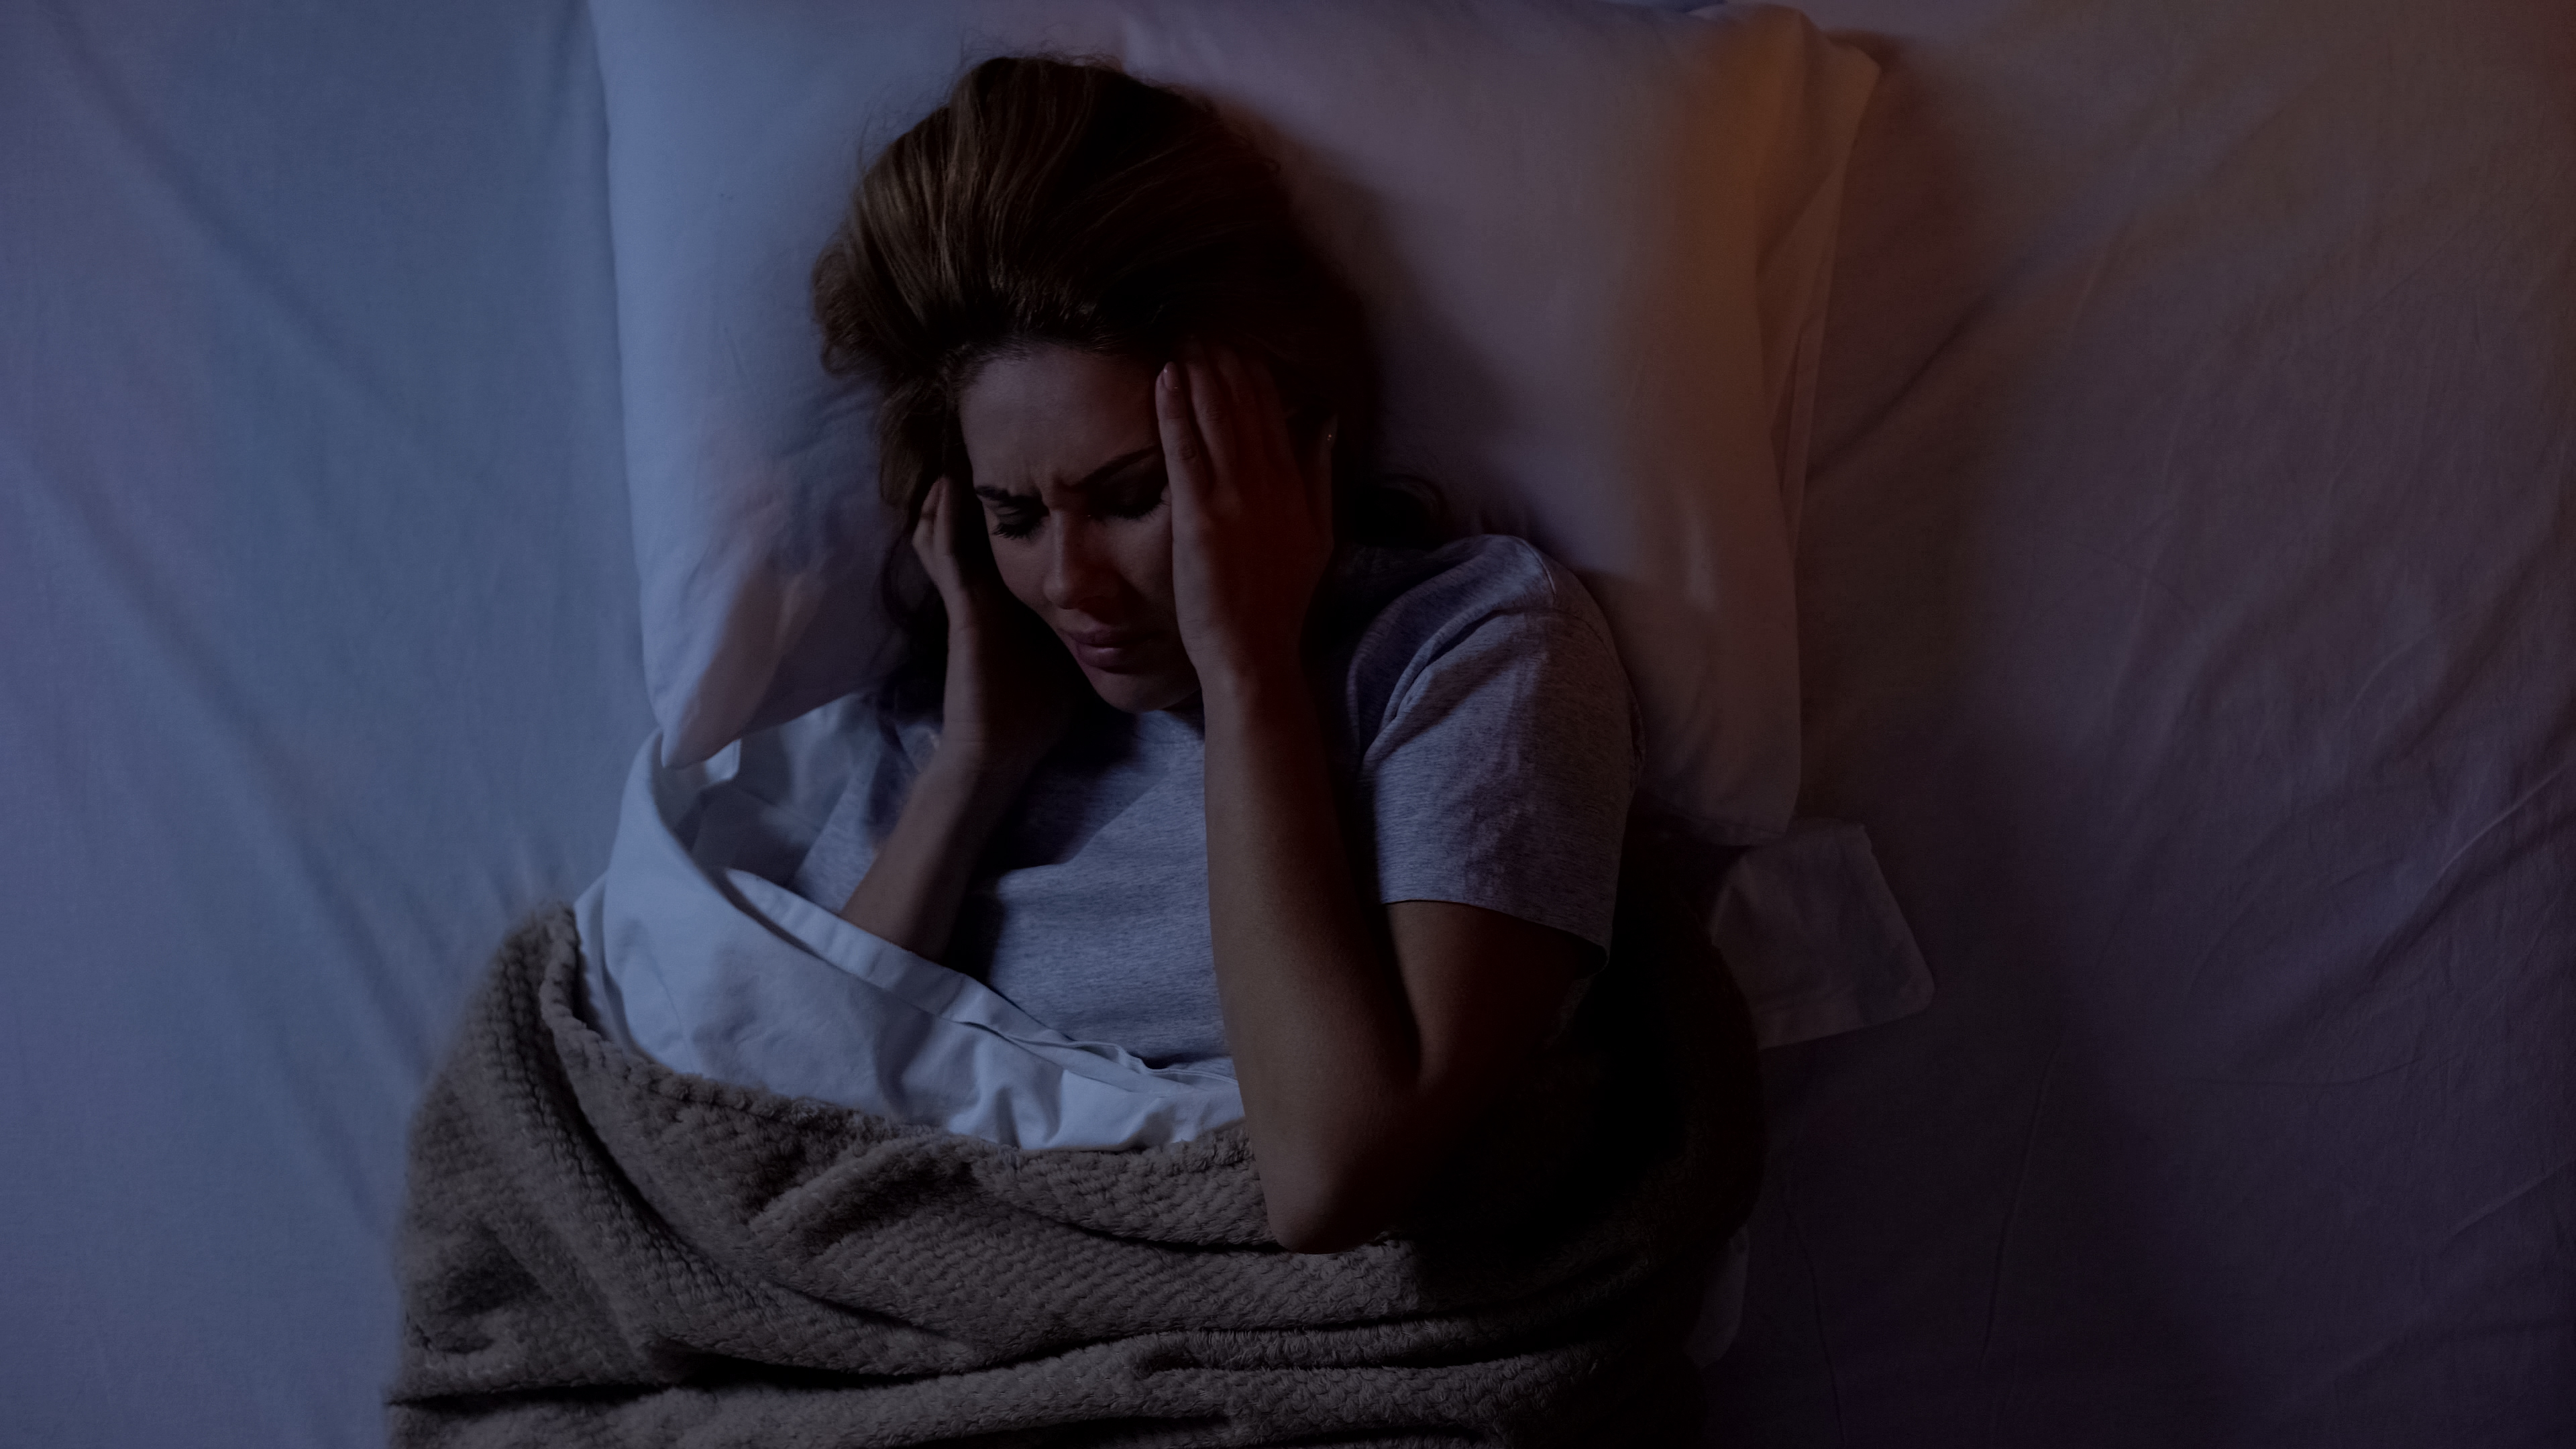 Lady holding head in bed, suffering headache after awakening at night. | Source: Shutterstock